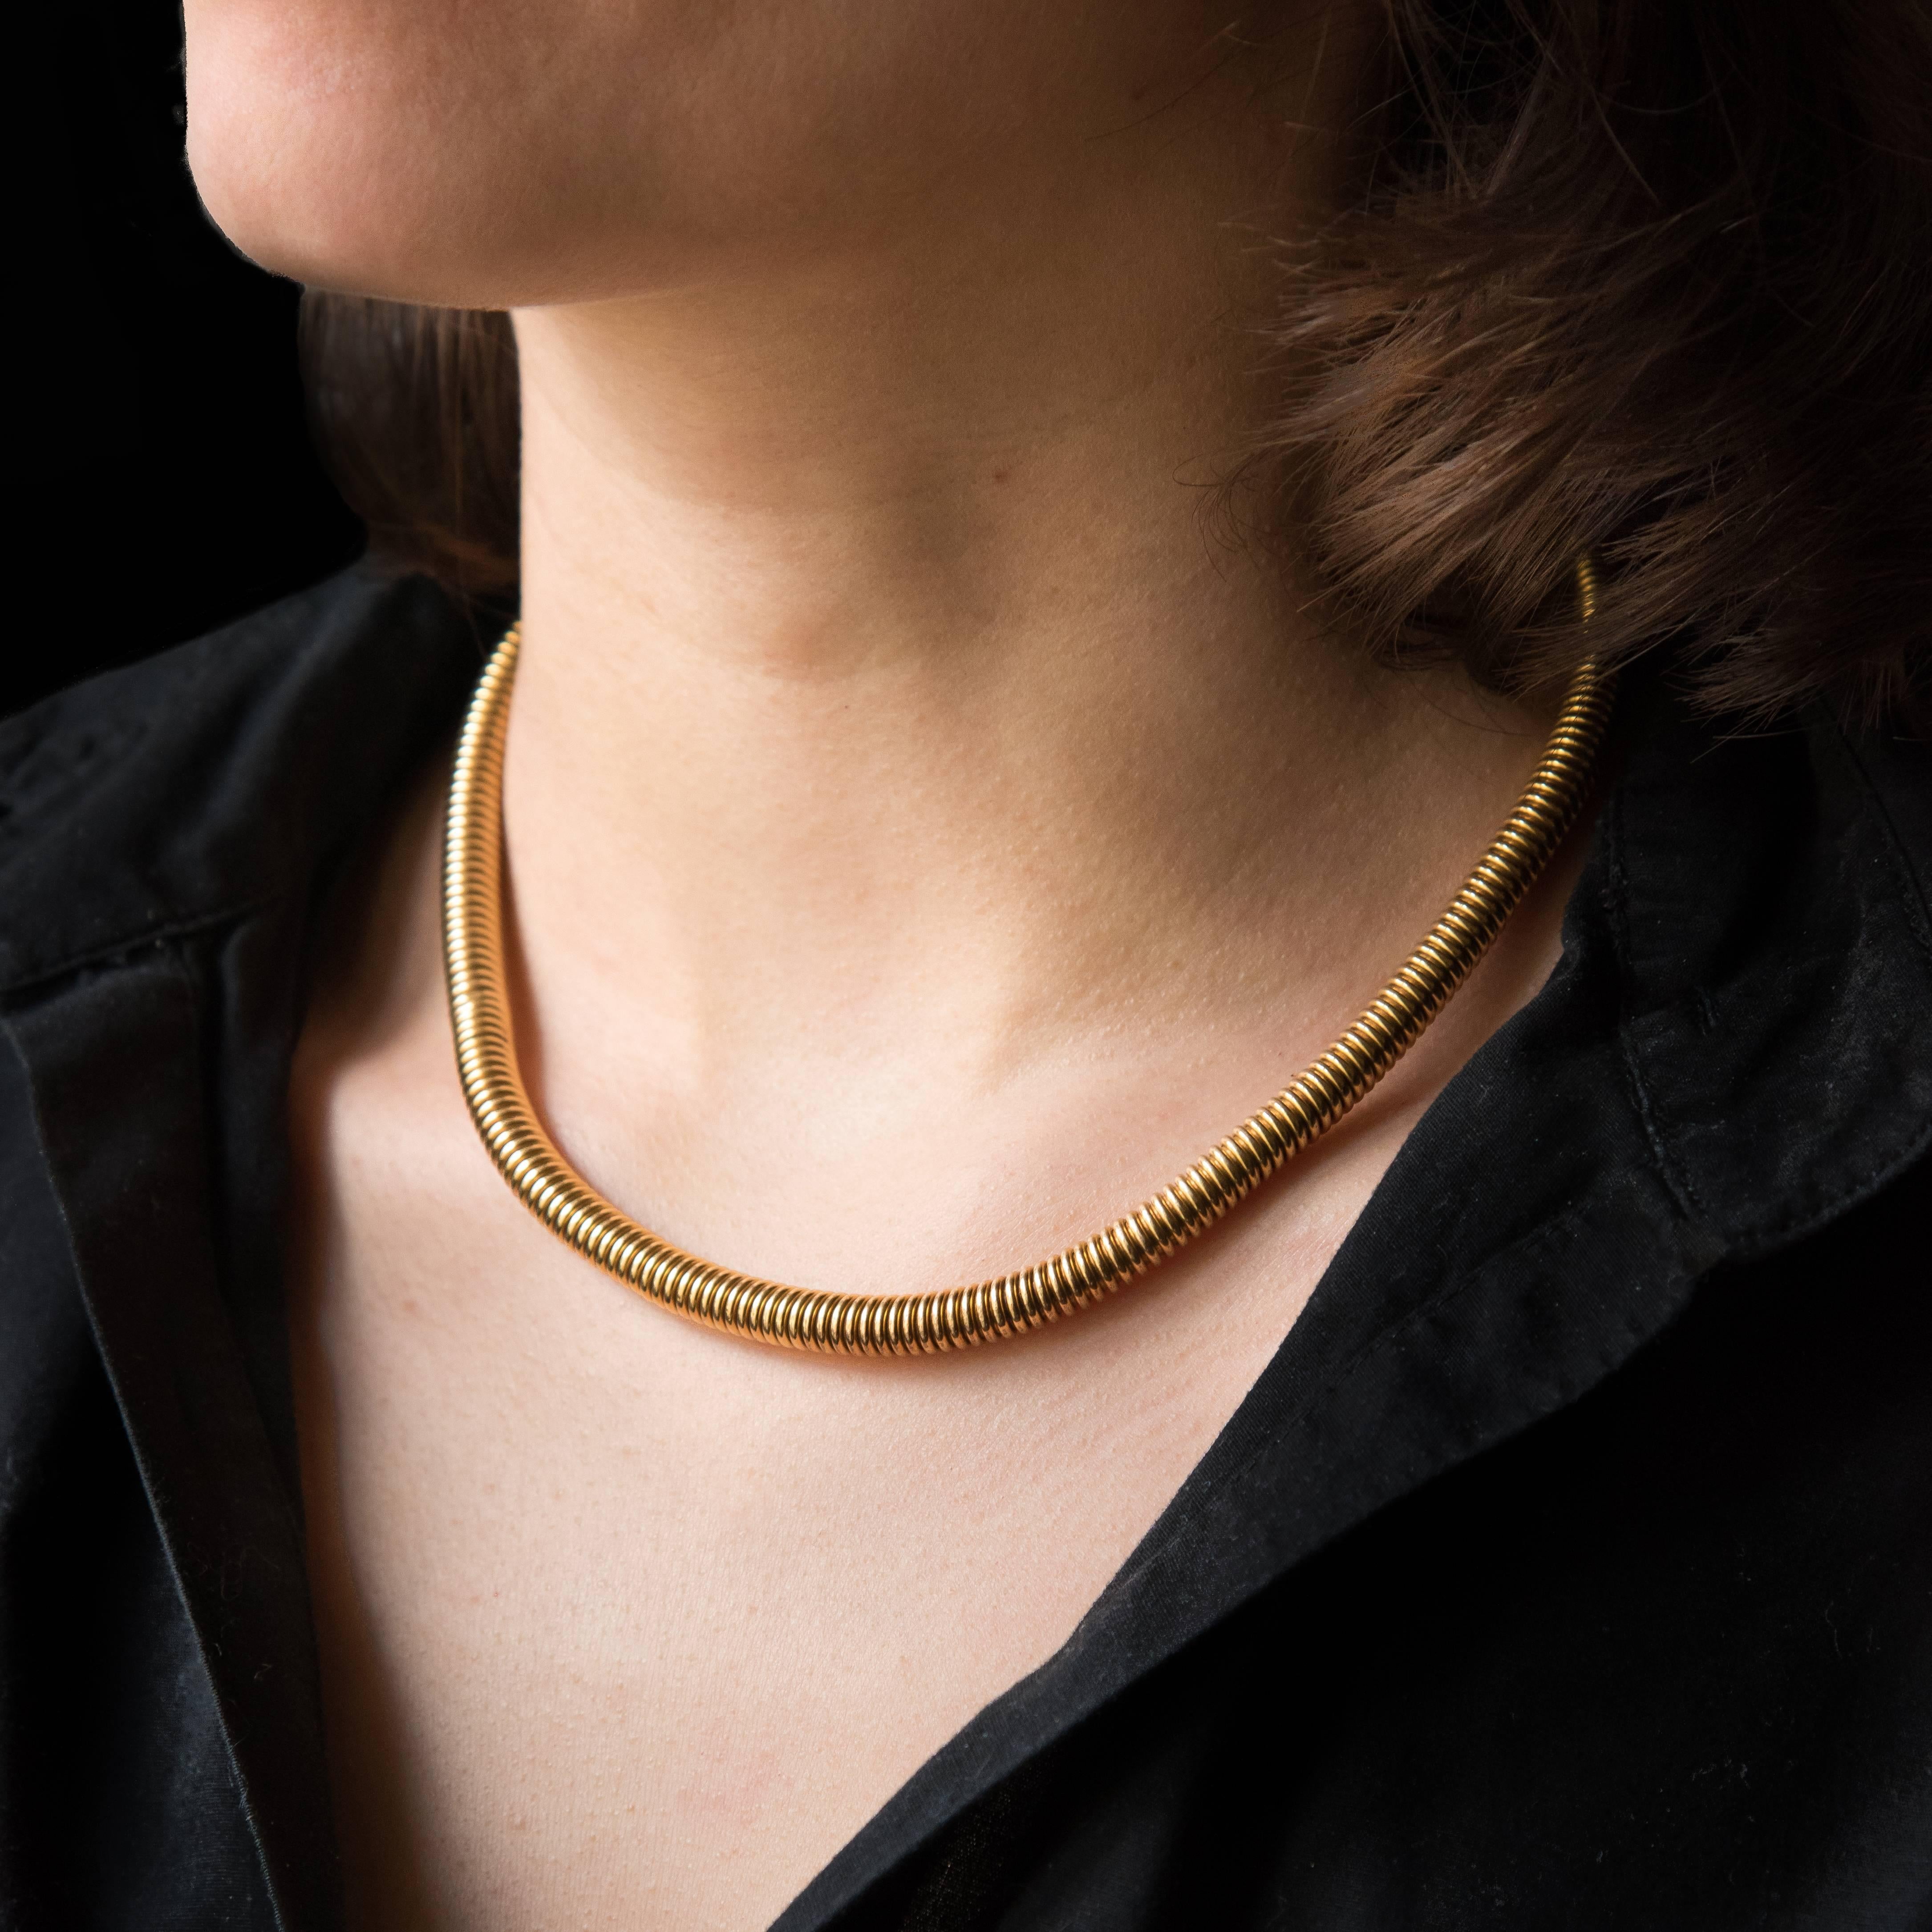 Necklace in 18 karats yellow gold, eagle's head and rhinoceros head hallmarks.
Known as a tubogas necklace because of its characteristic flexible tube mesh, this vintage necklace is an iconic model from the 1950s. It features a round wire and a